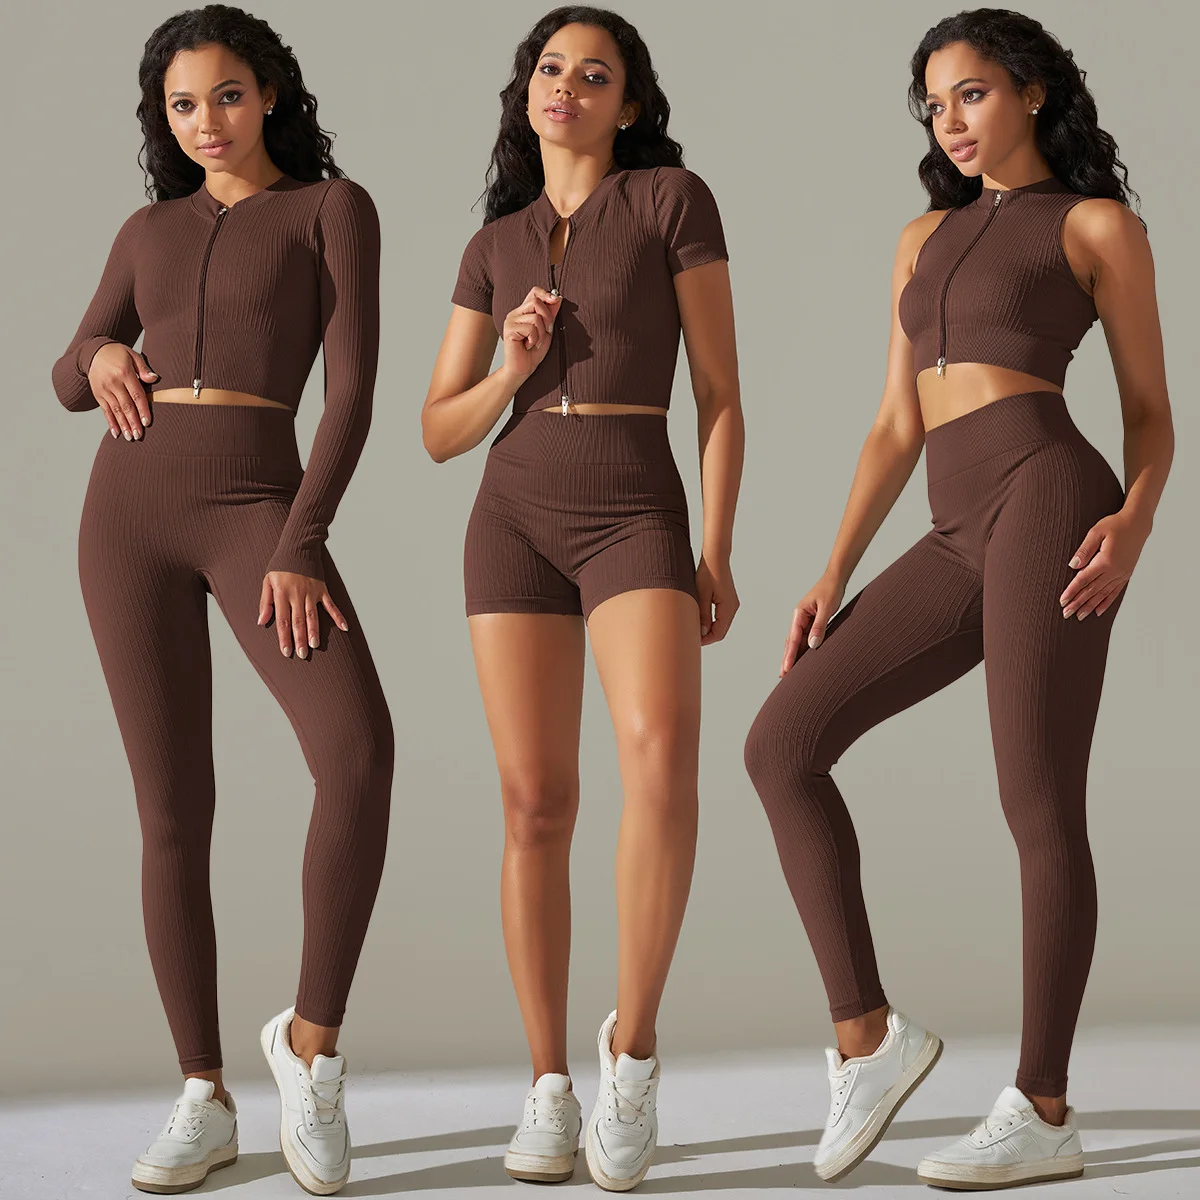 

Aoyema Women 10 Colors 6 Piece Ribbed Yoga Set Zipper Natural Color Activewear Jogger Seamless Sportswear Fitness Gym Clothing